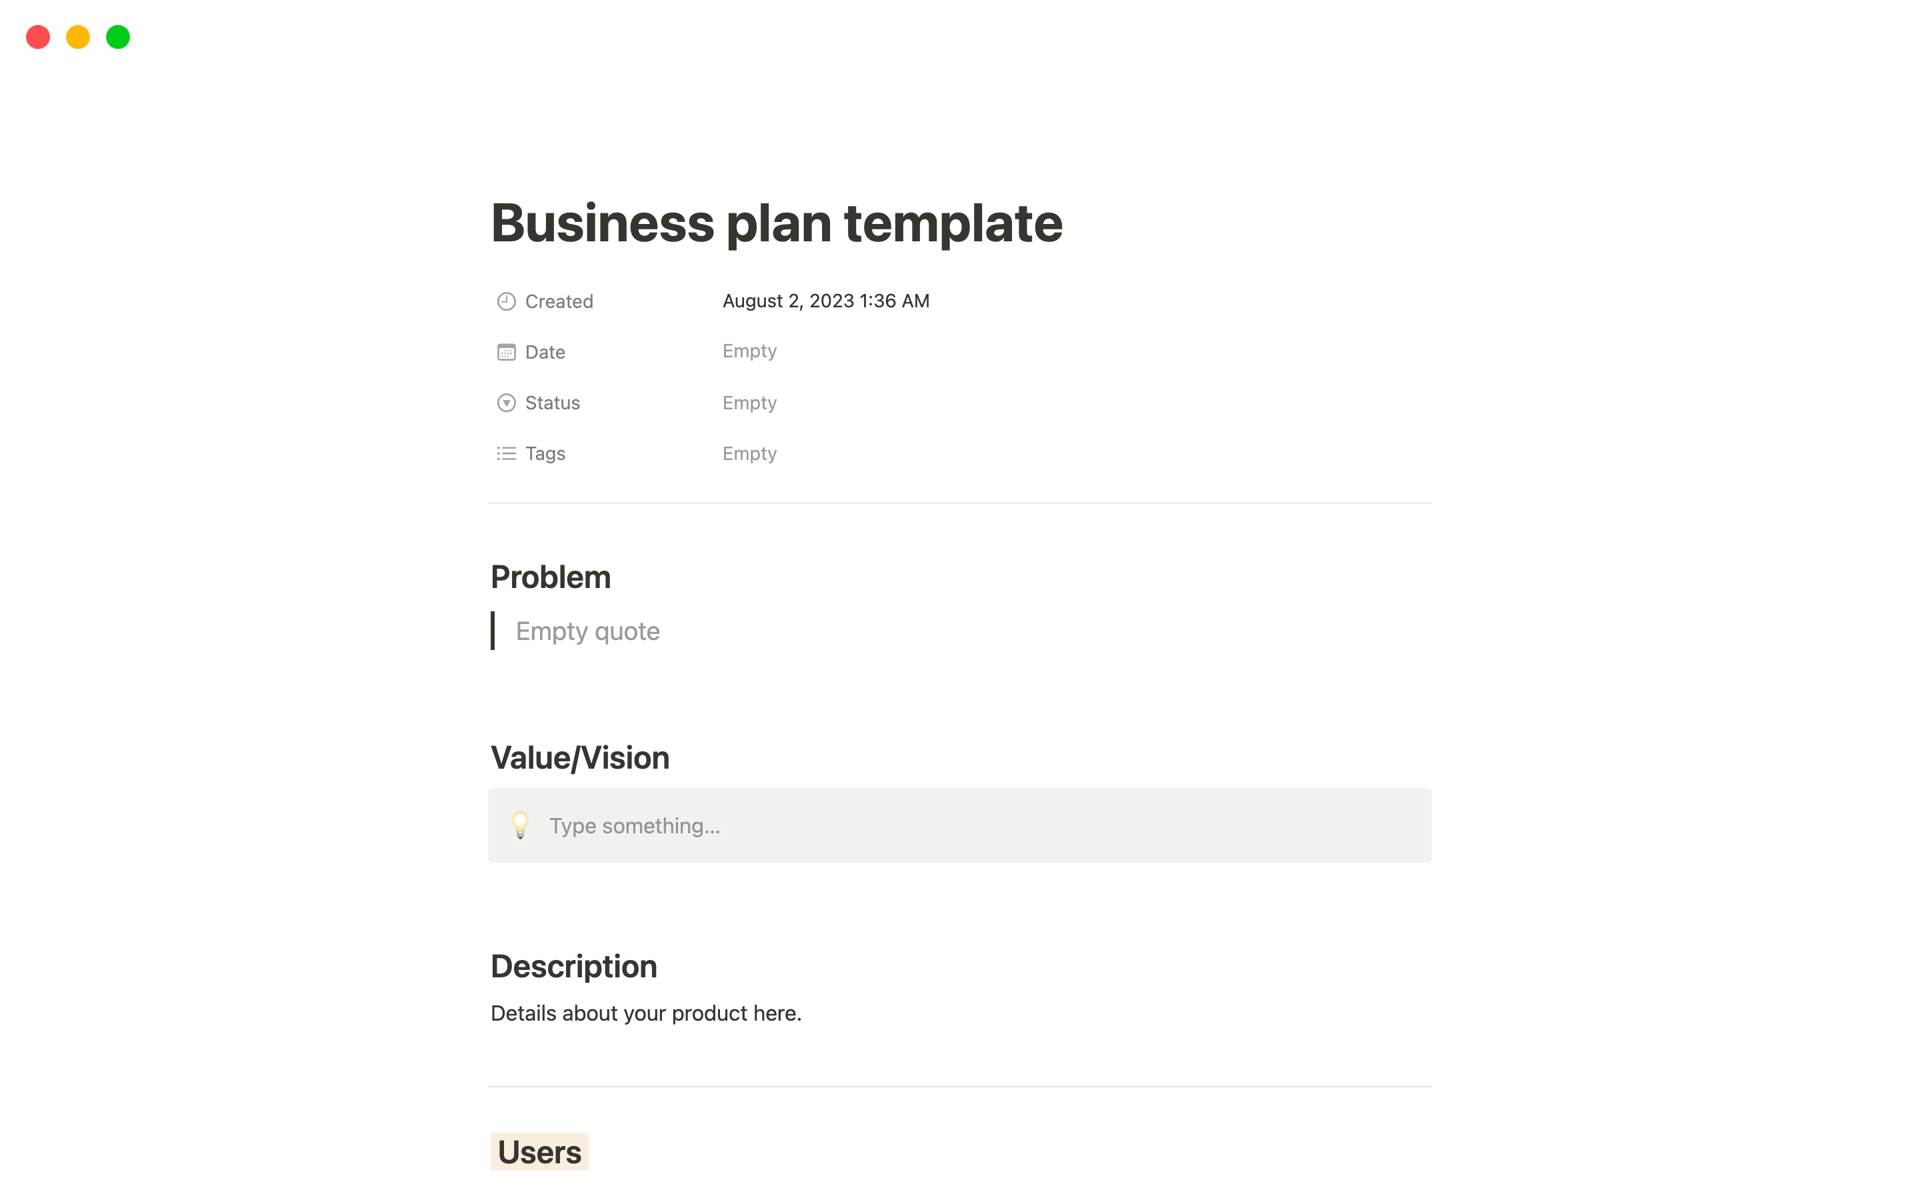 A template preview for Business plan - Quick start